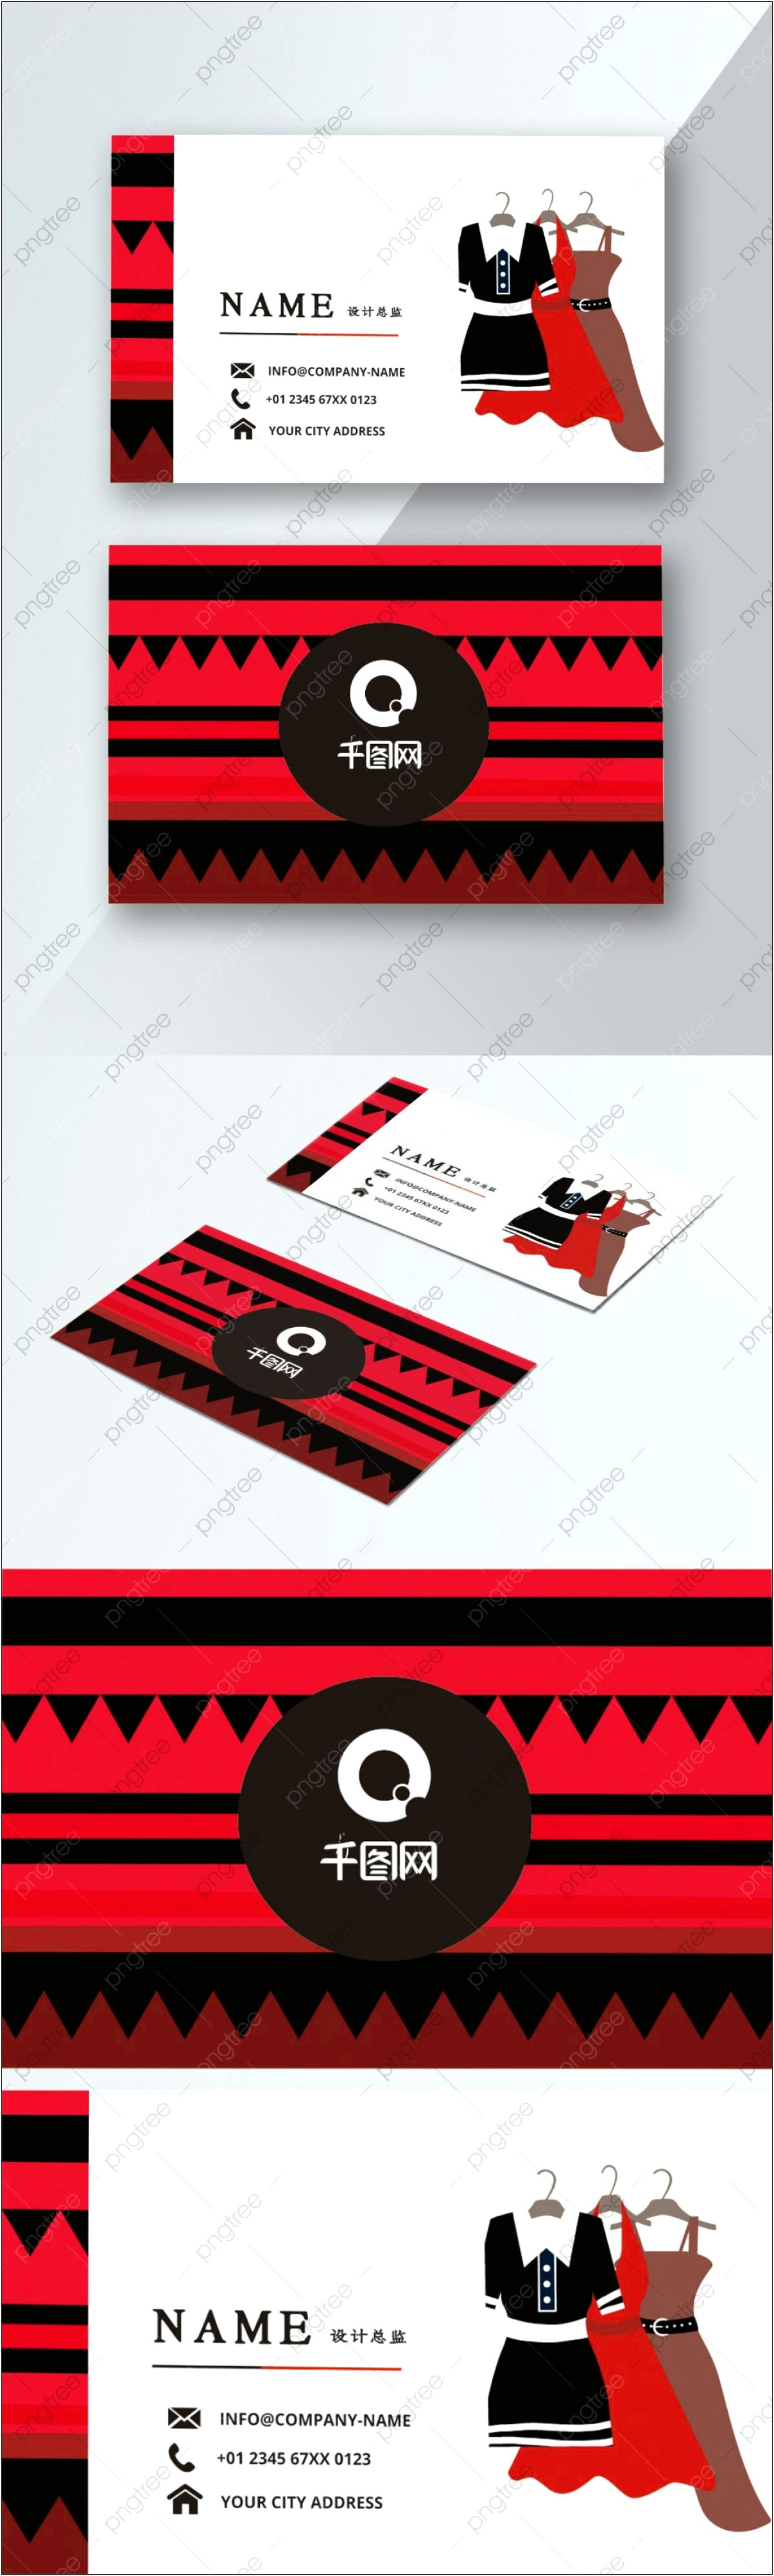 Business Name Card Template Free Download